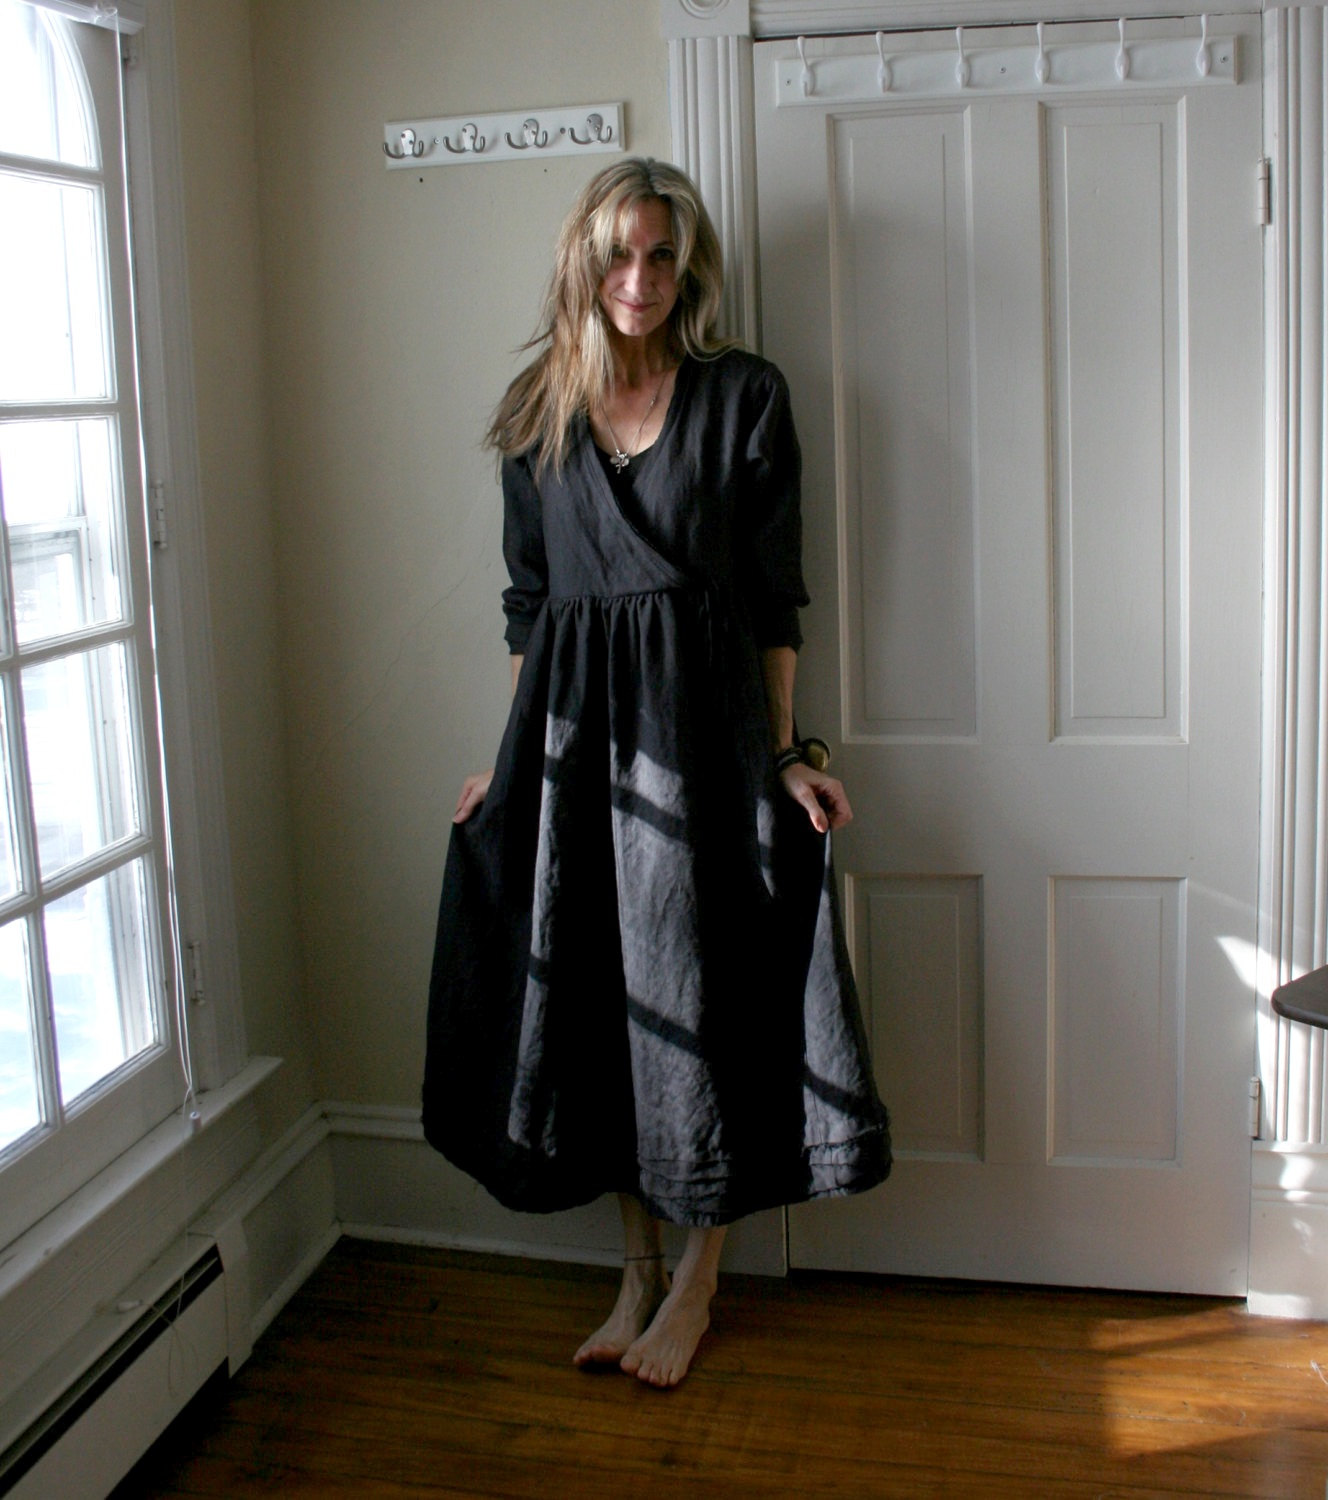 Beth, Linen Tuscan Dress done in IL019 Black

Breathe Clothing 

https://www.etsy.com/listing/213367...